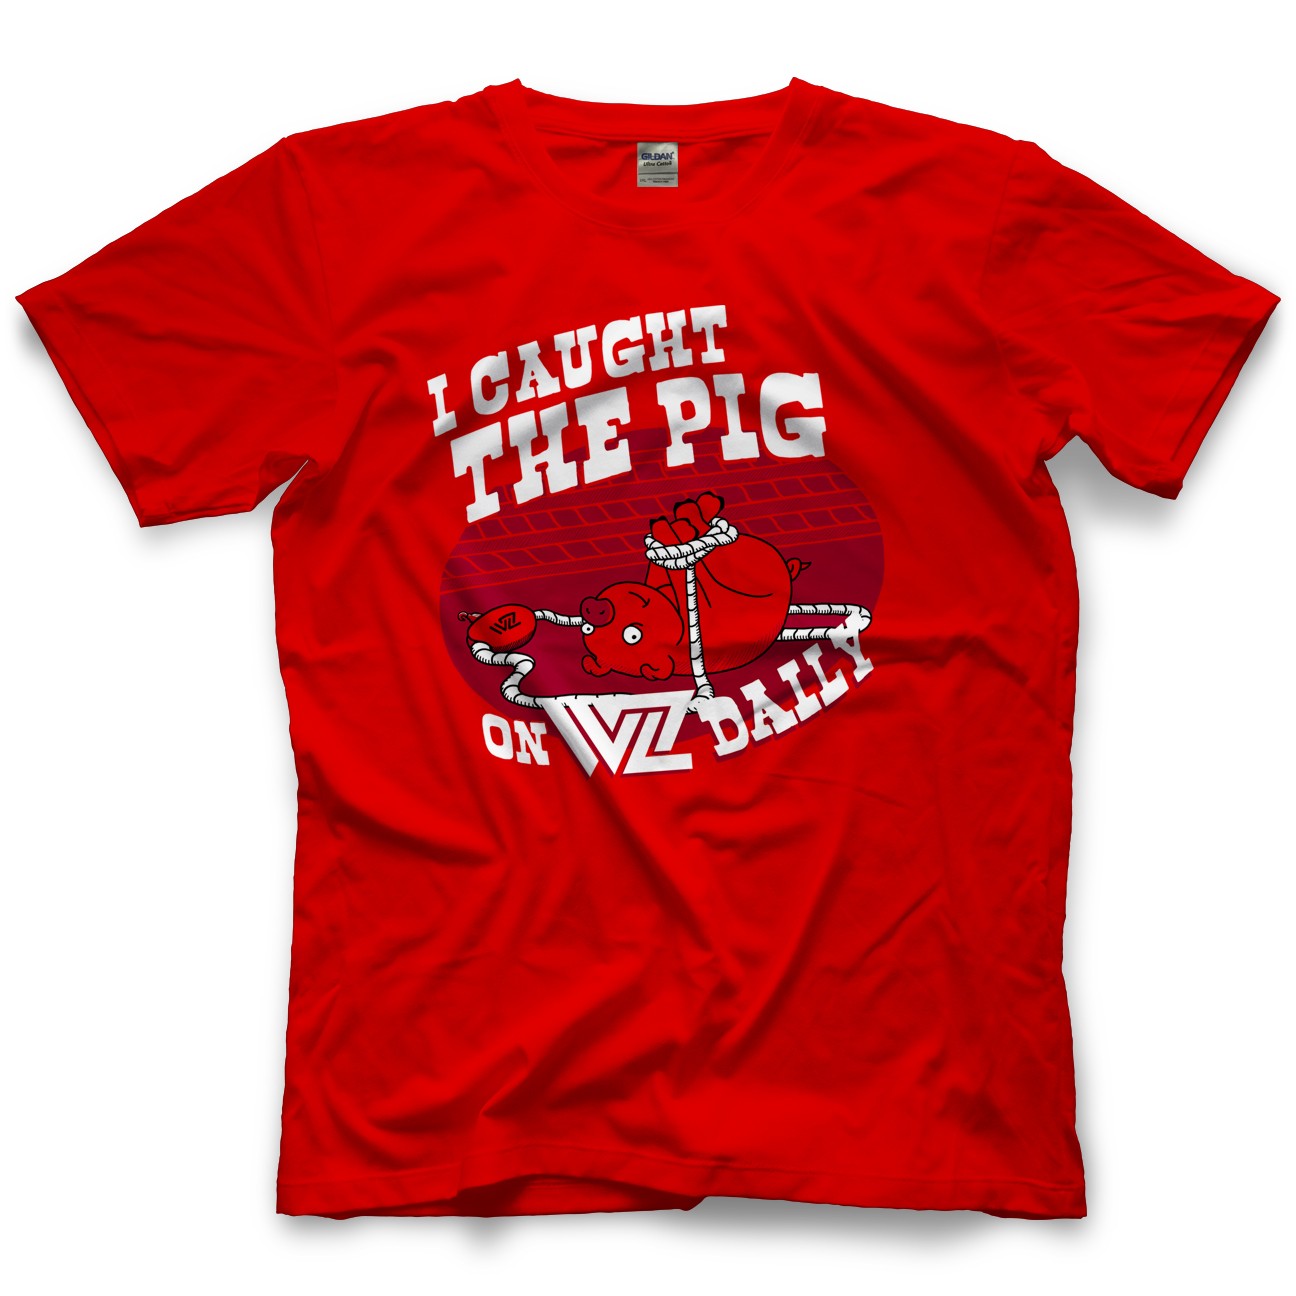 The Pig 1